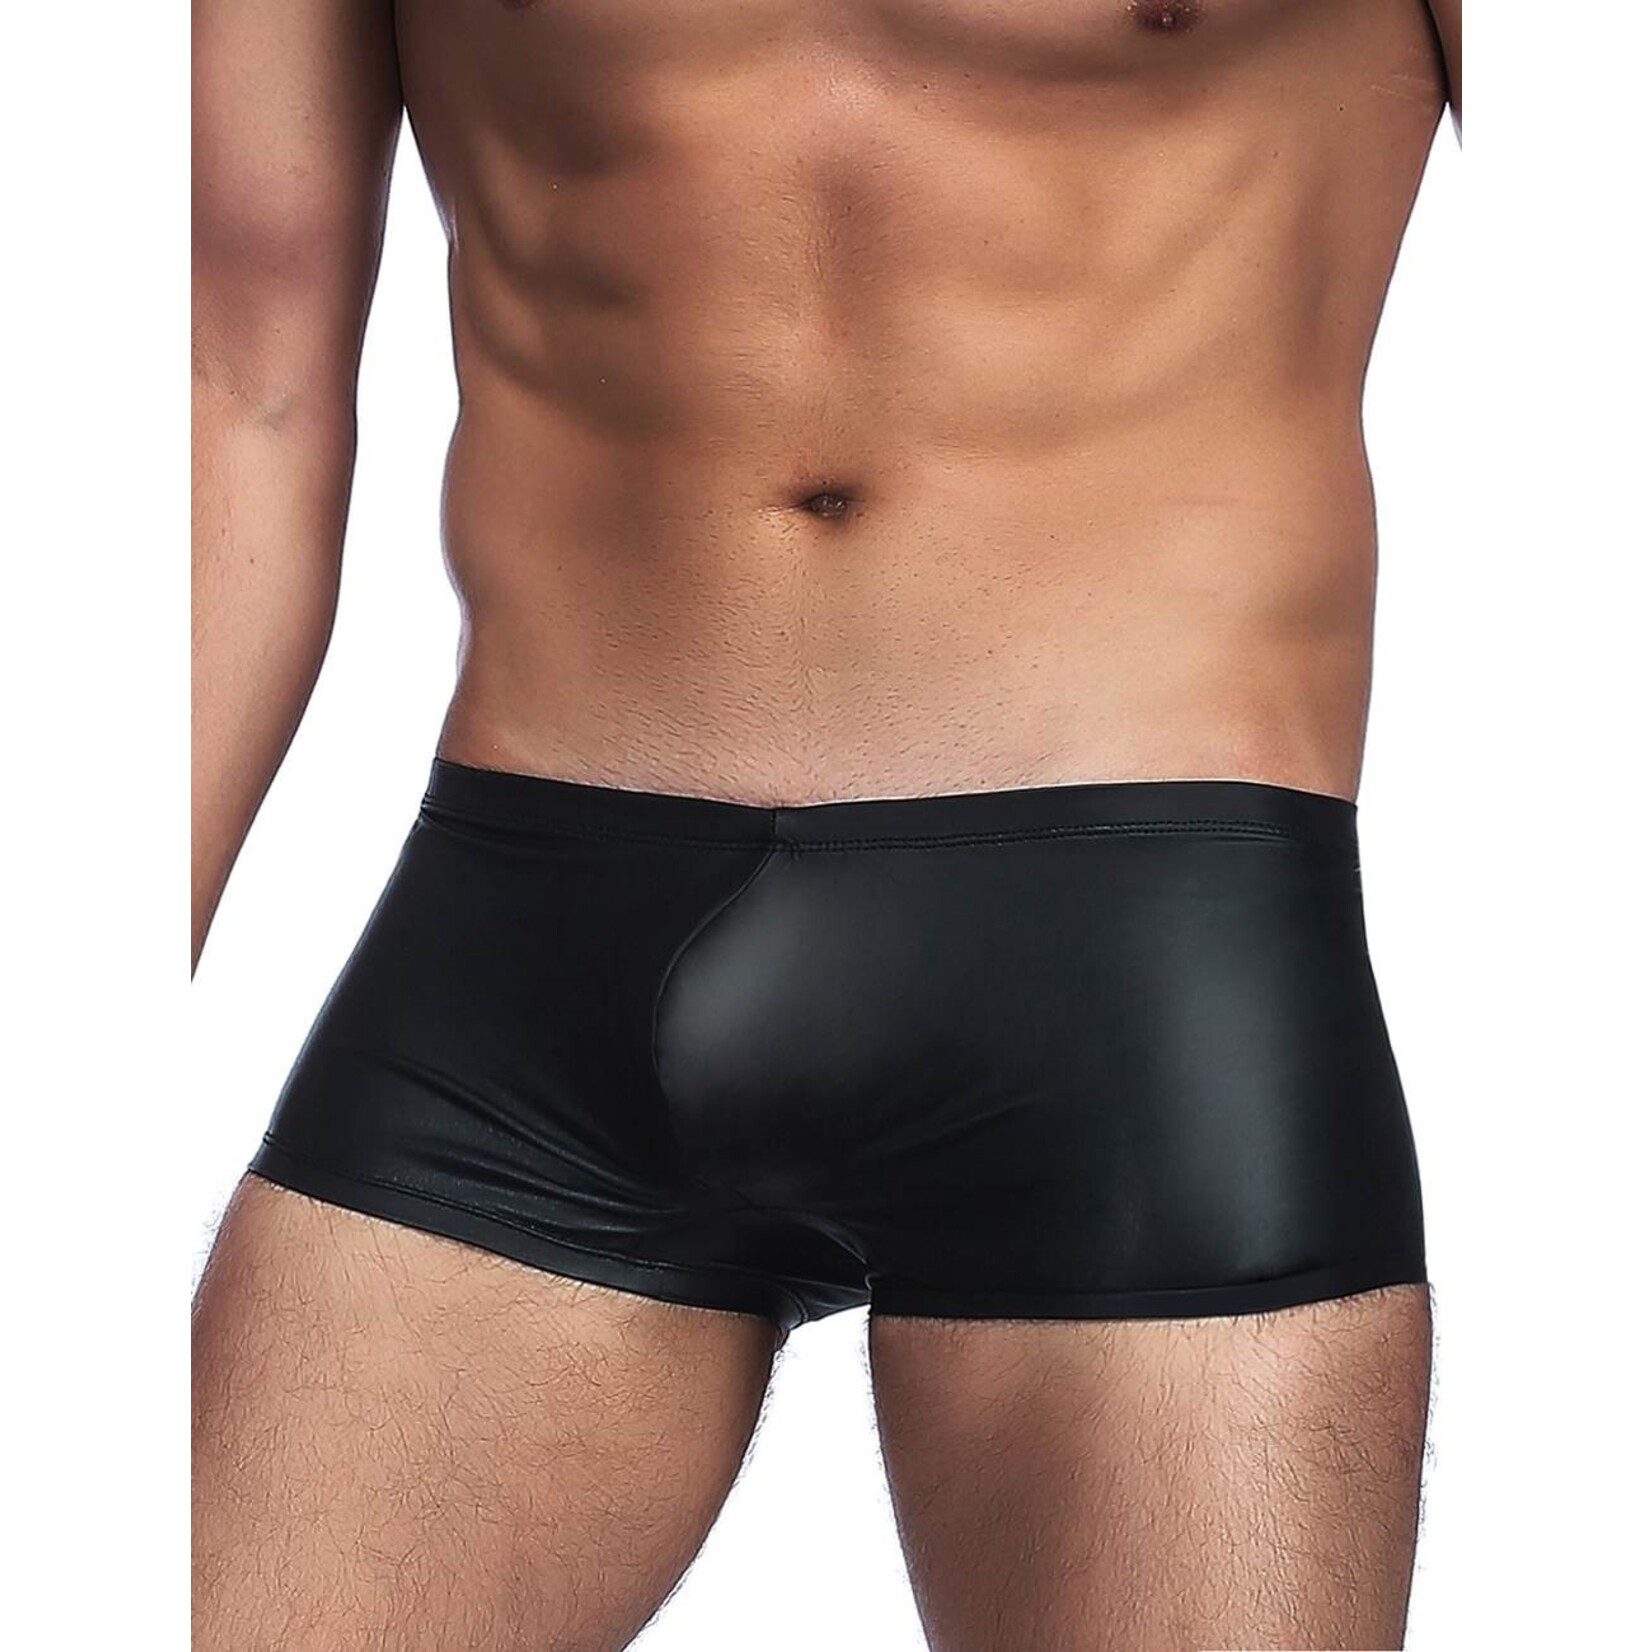 OH YEAH! -  BLACK LEATHER SEXY PANTY FOR MAN L